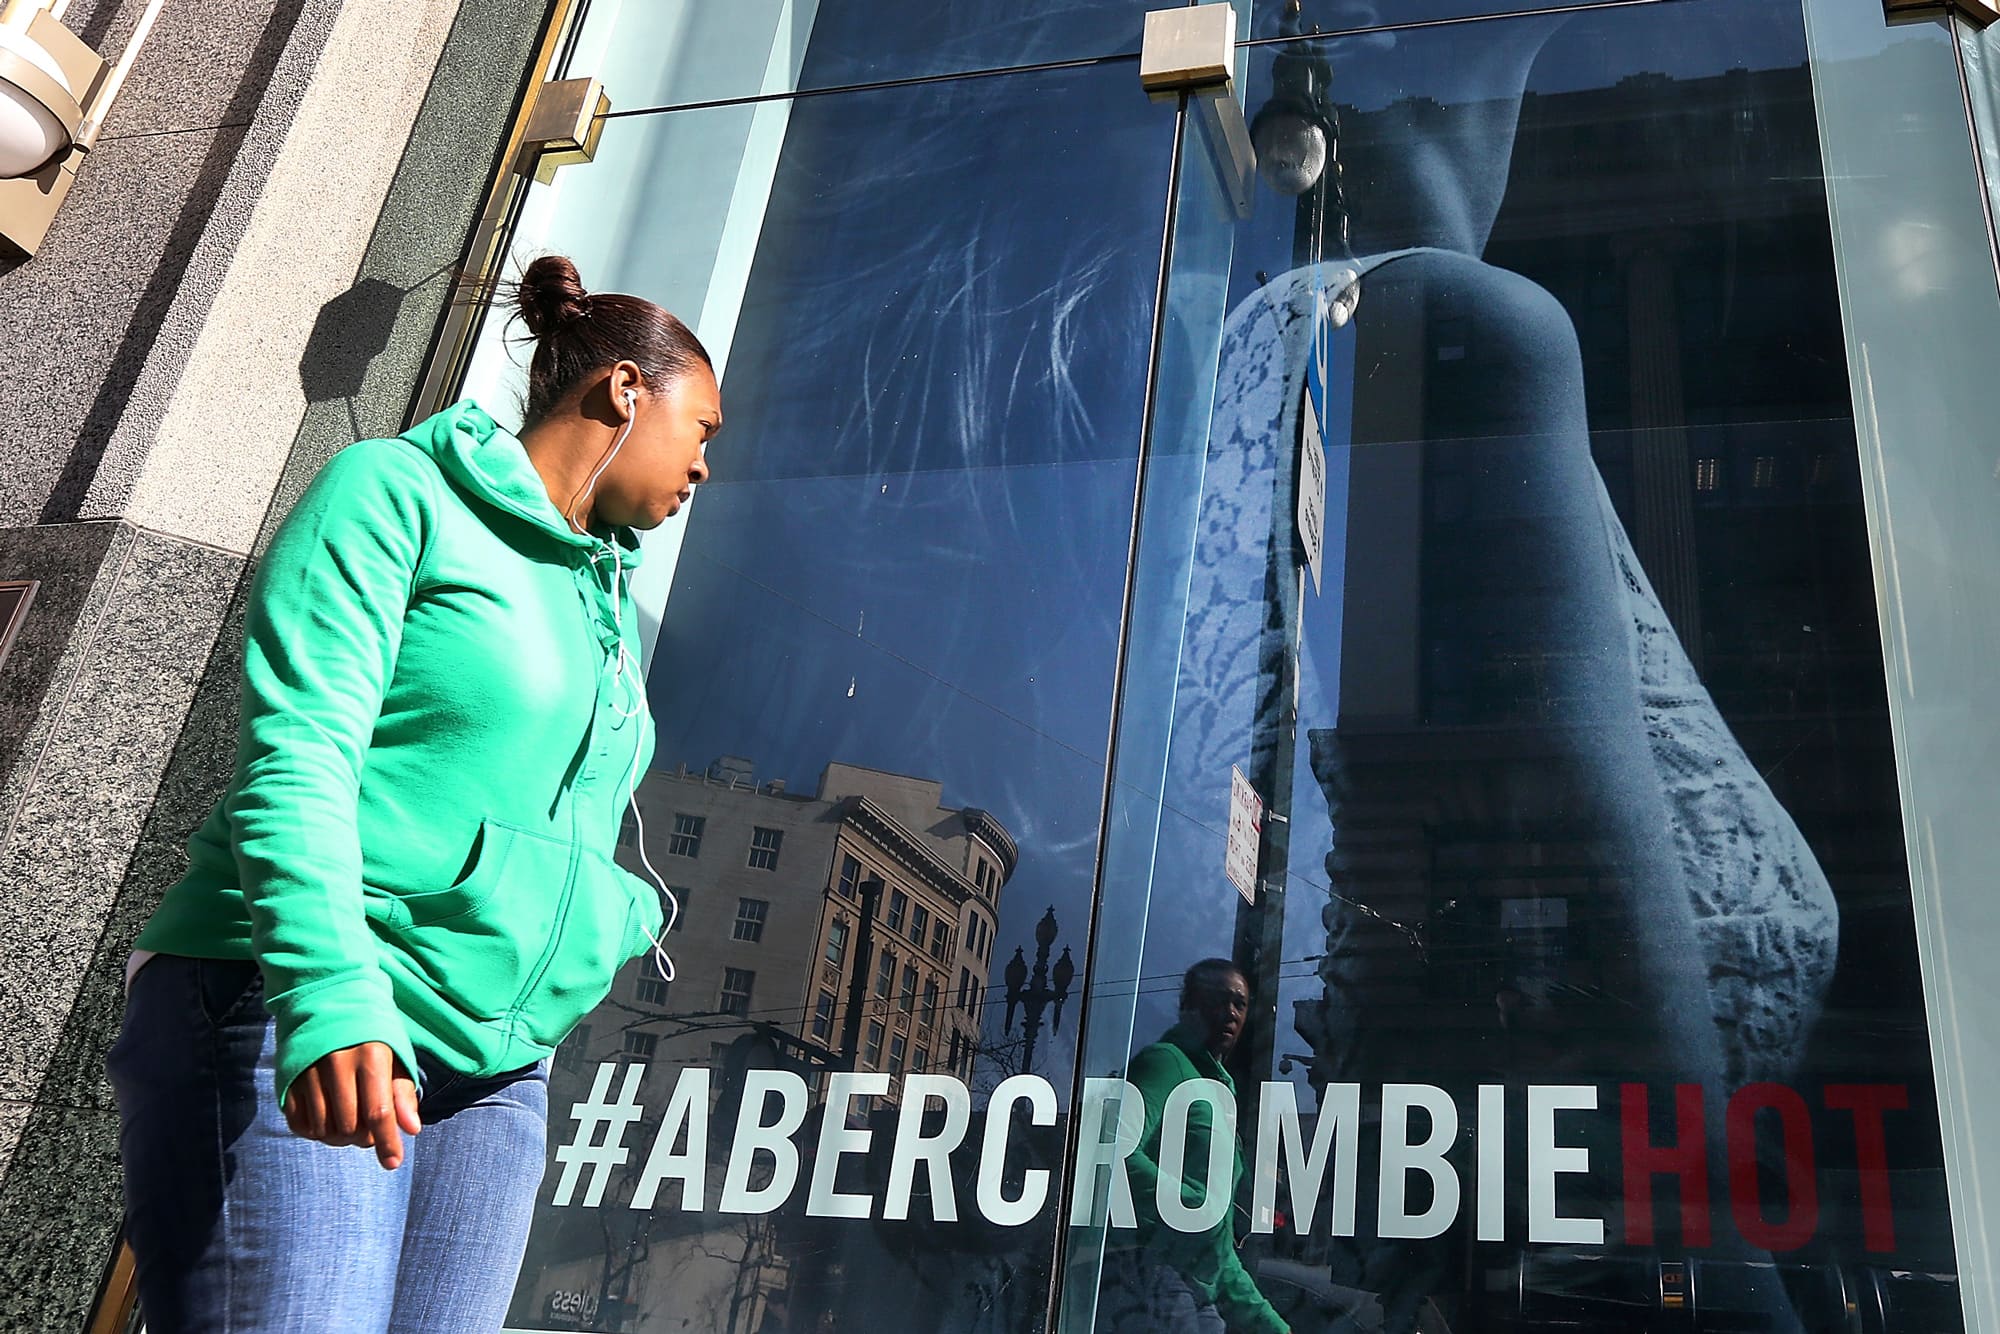 Abercrombie \u0026 Fitch says teens are 